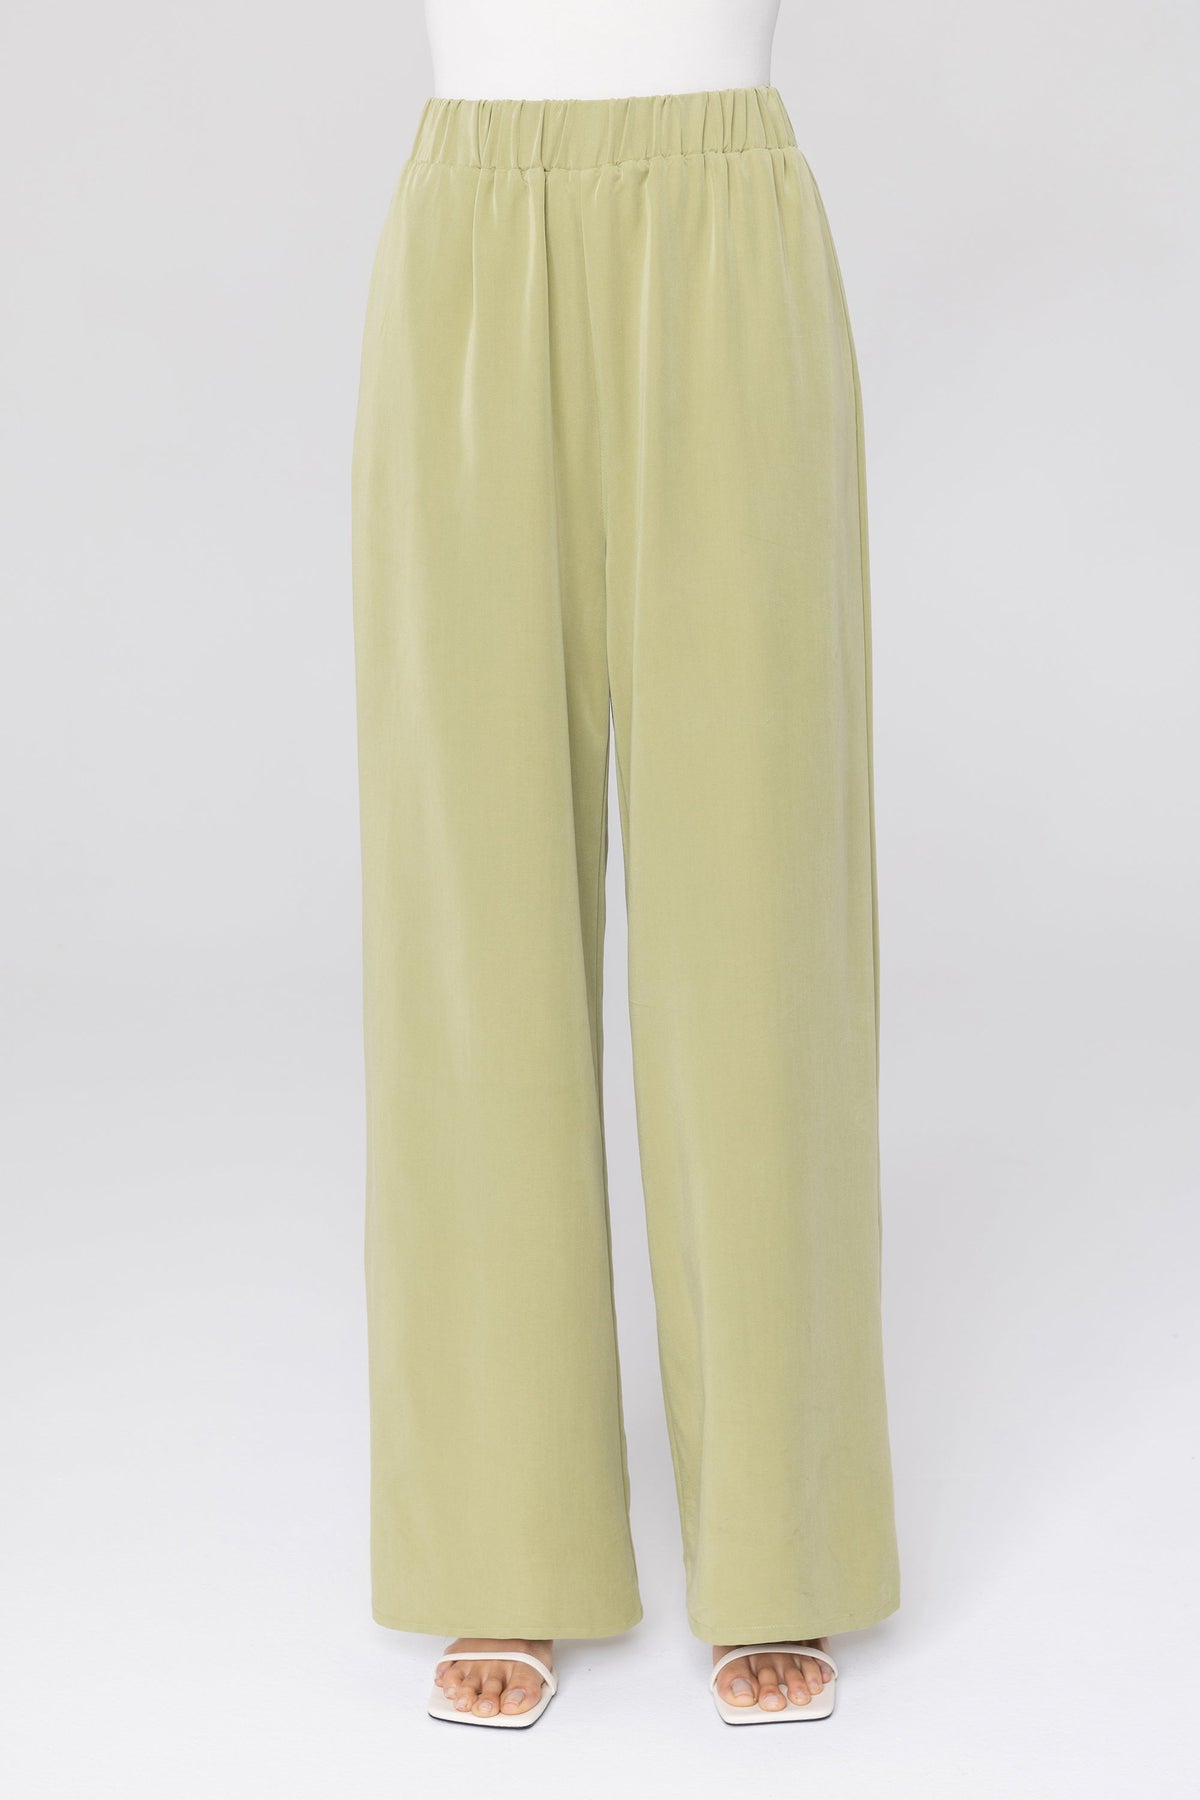 Cecilia Wide Leg Pants - Olive Veiled Collection 